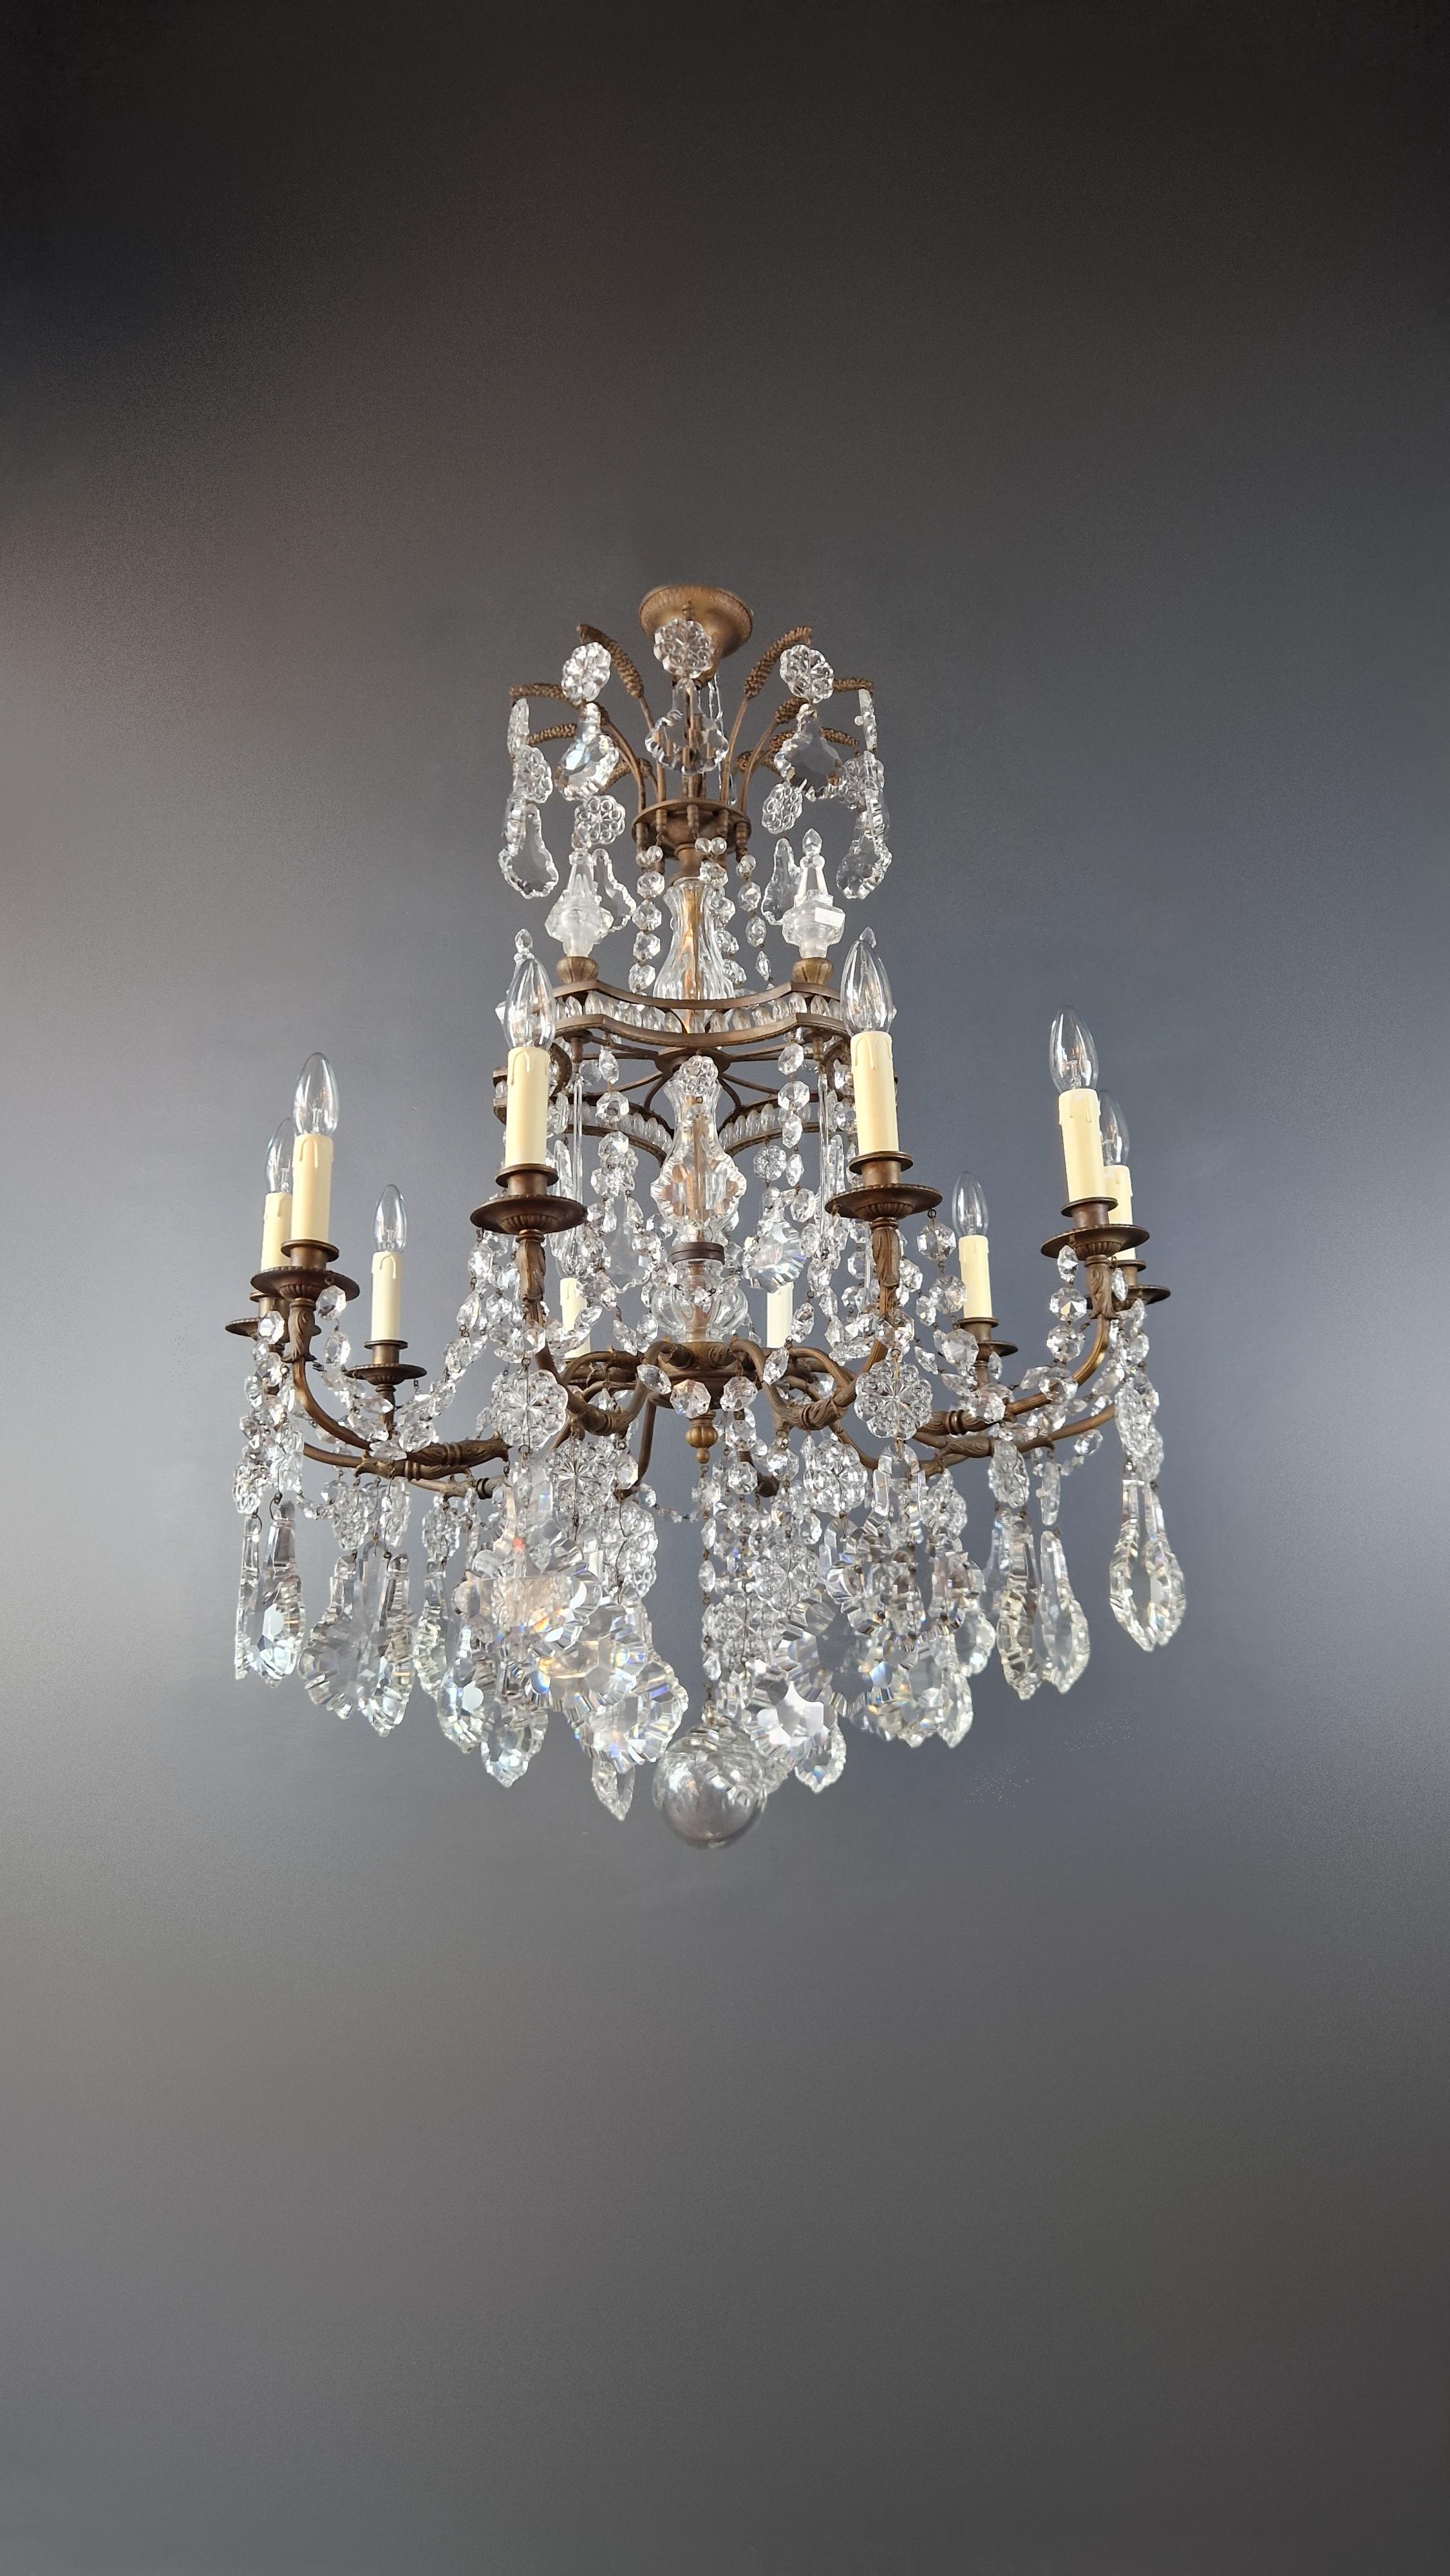 Art Nouveau Crystal Chandelier Brass Large Crystals Traditional Antique Ceiling In Good Condition For Sale In Berlin, DE